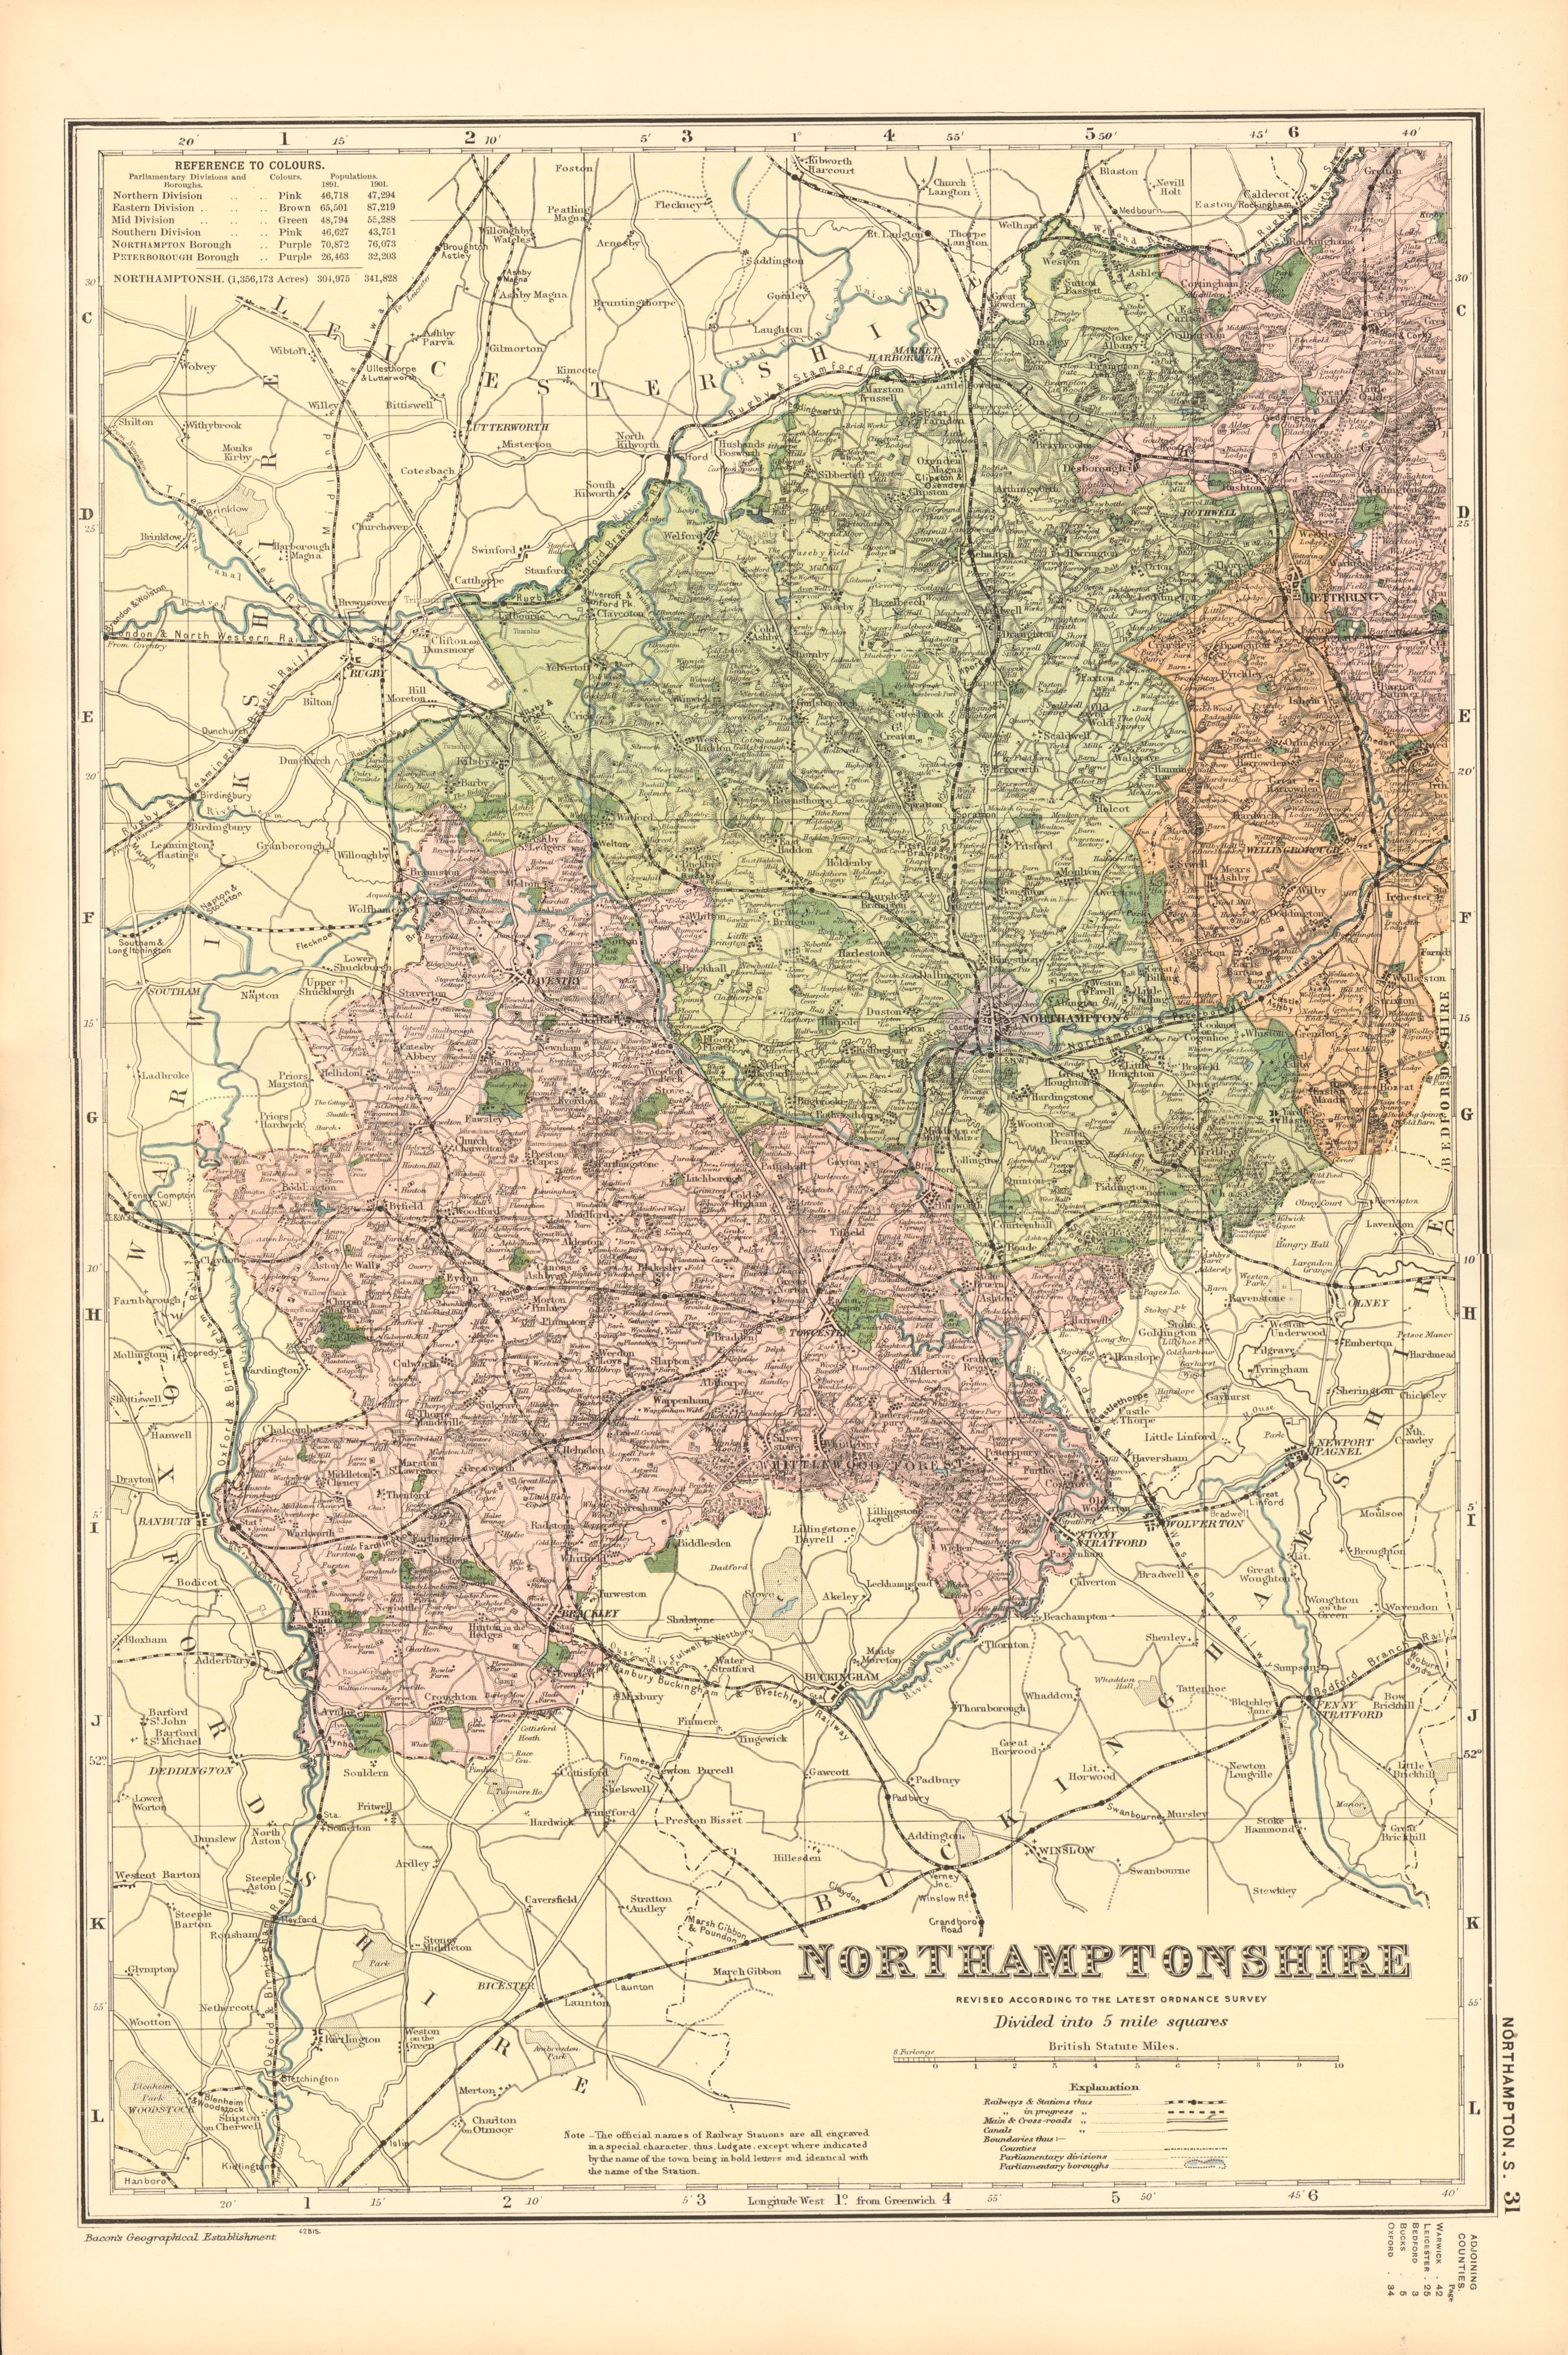 Associate Product NORTHAMPTONSHIRE (SOUTH). Constituencies, boroughs & parks. BACON 1904 old map